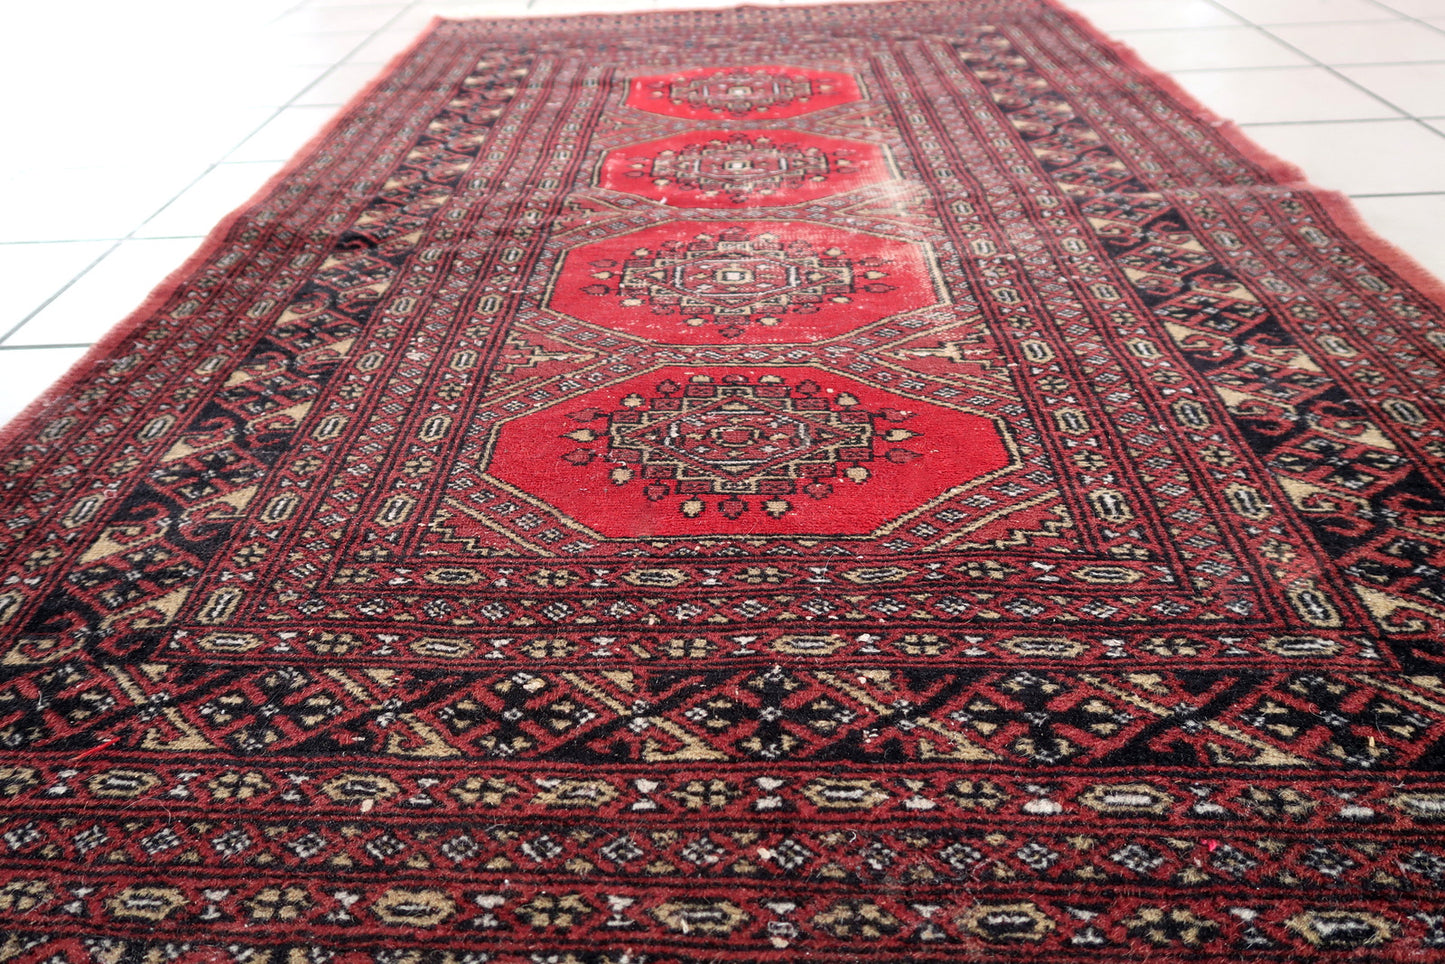 Handmade vintage Uzbek Bukhara rug in classic design. The rug is from the end of 20th century in distressed condition.